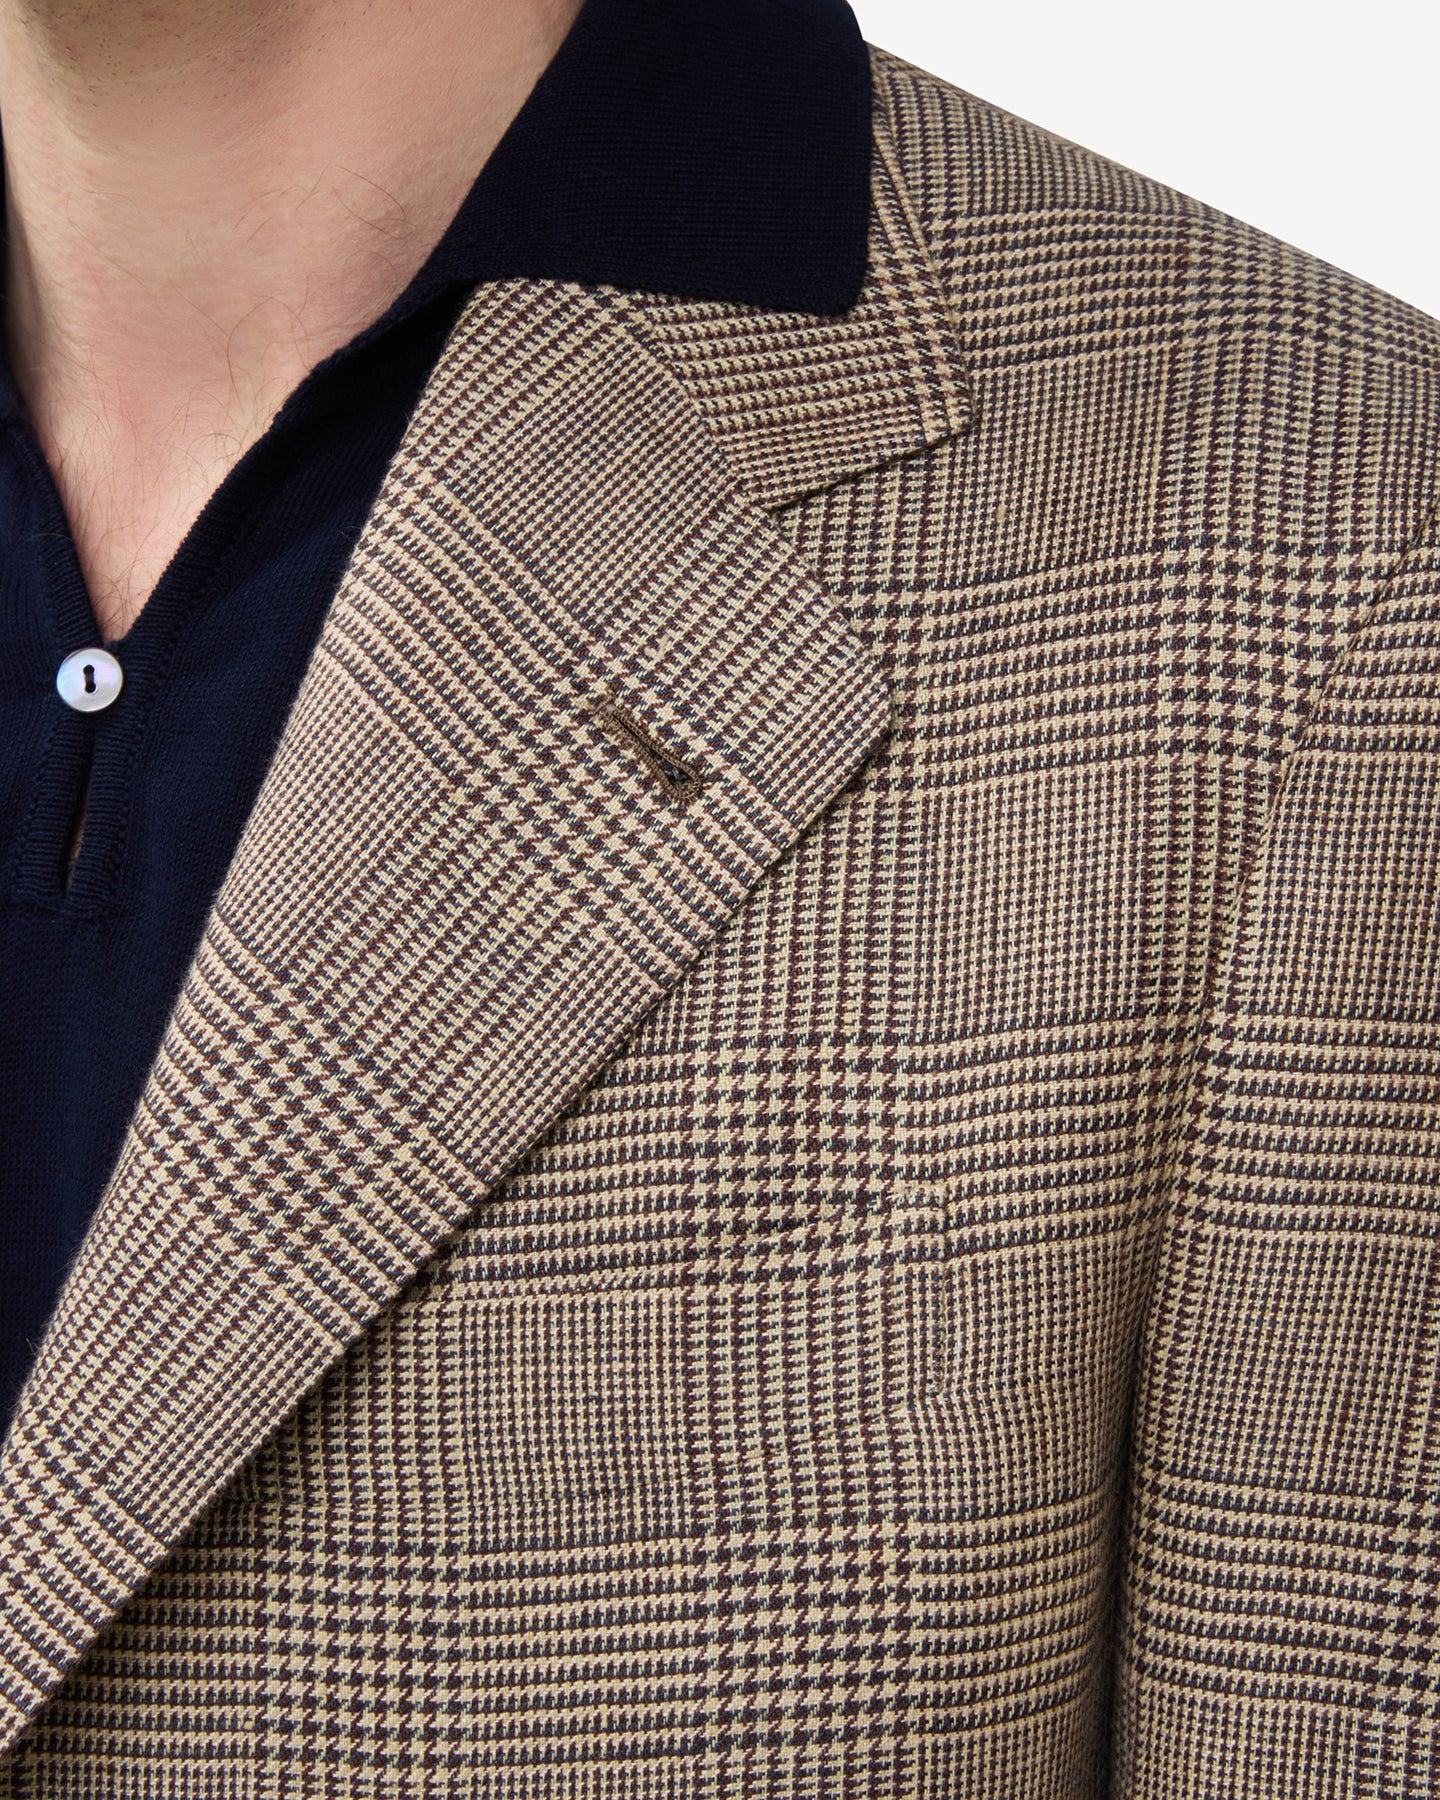 The lapel of a brown linen Prince of Wales sport coat